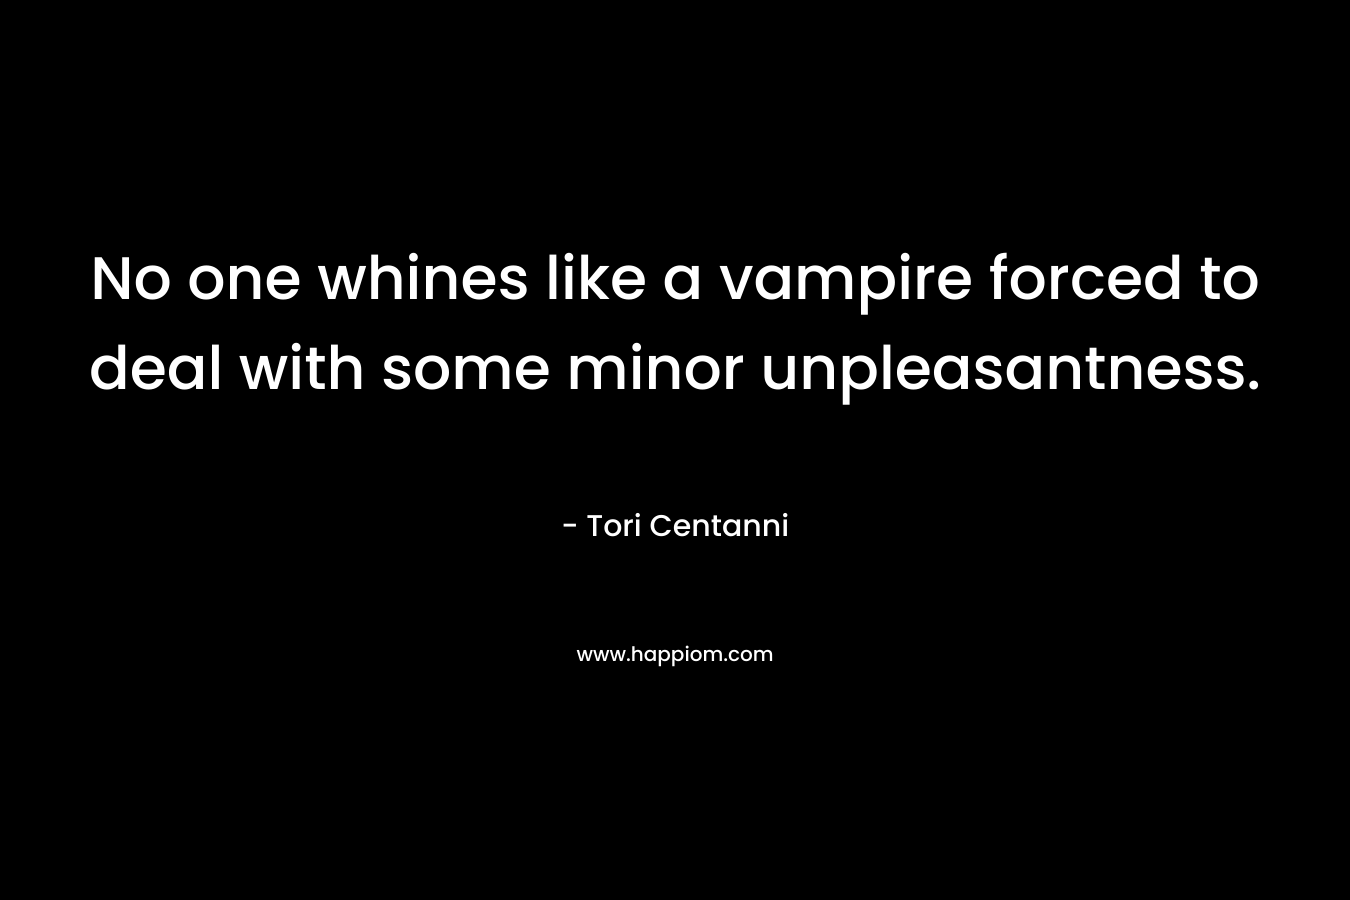 No one whines like a vampire forced to deal with some minor unpleasantness. – Tori Centanni